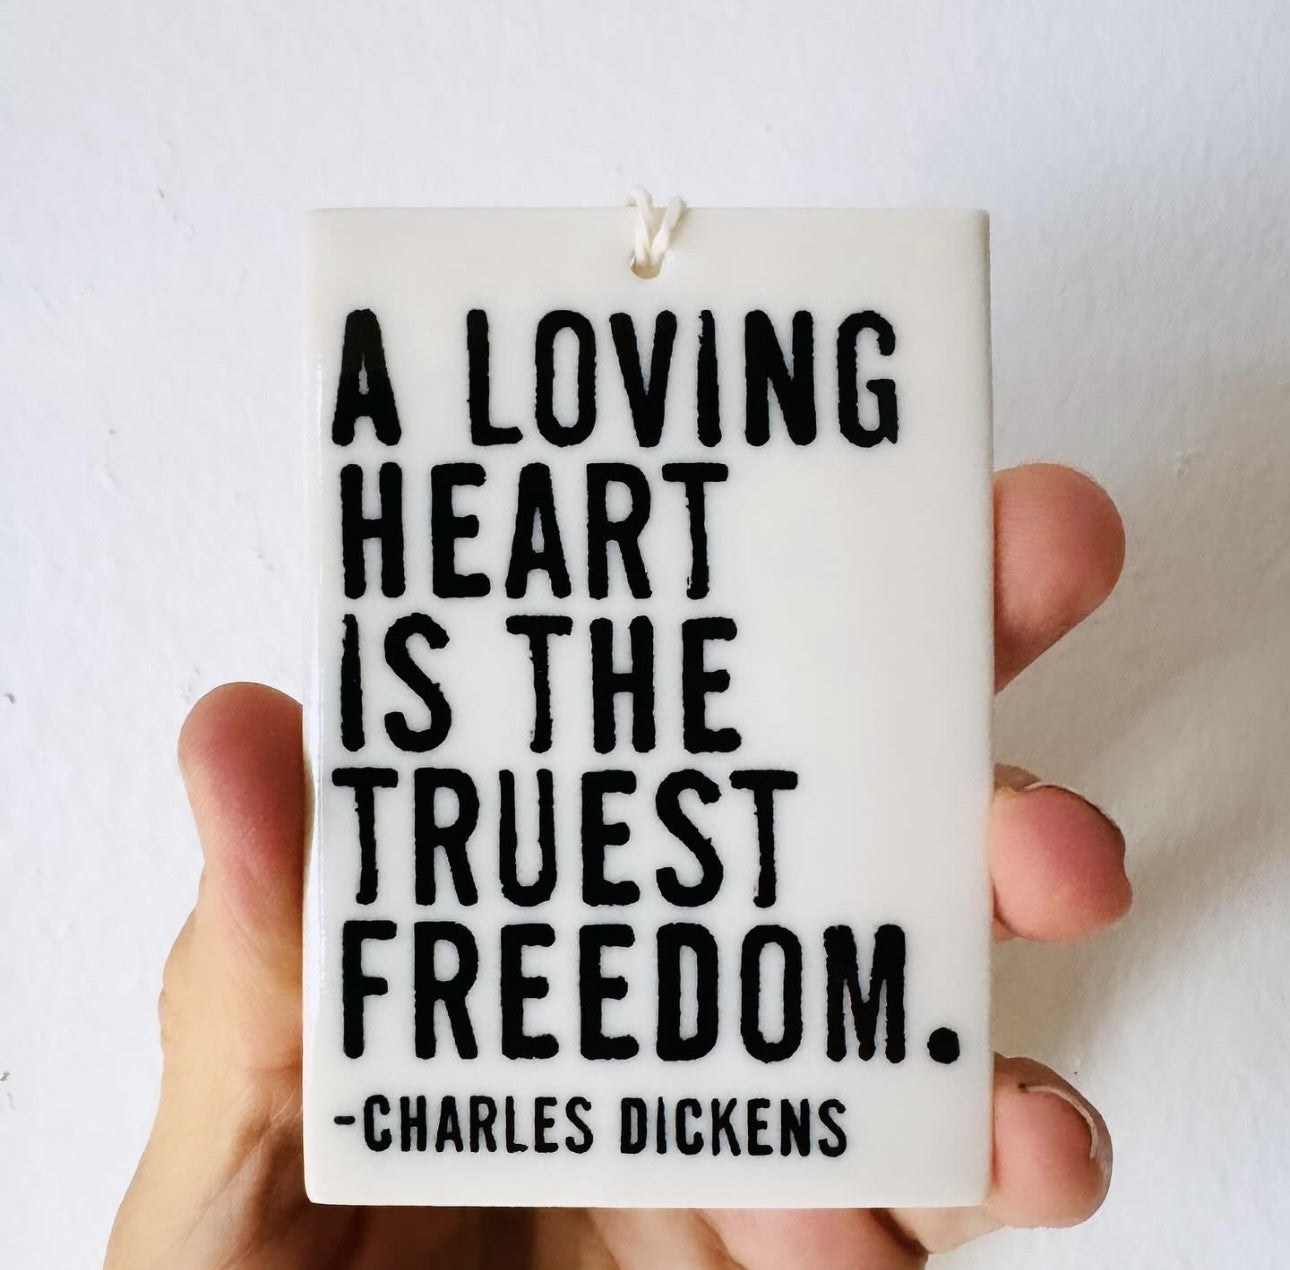 charles dickens quote ceramic wall tag